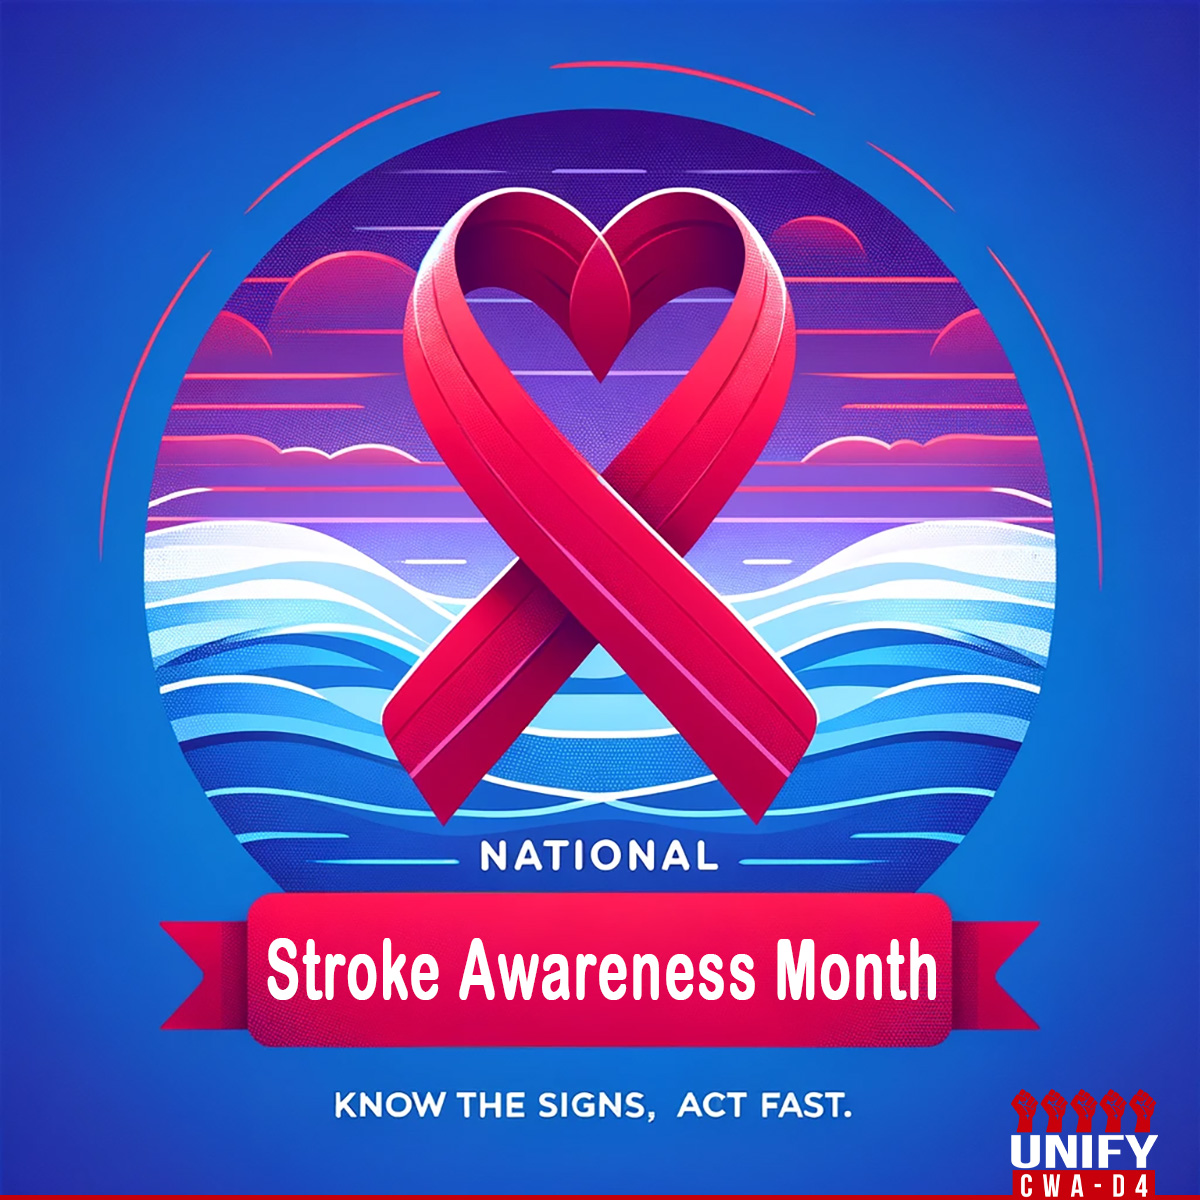 May is National Stroke Awareness Month. Recognizing the signs of a stroke and acting quickly can save lives. Learn the symptoms, stay informed, and be ready to respond – your quick, decisive efforts can make all the difference. #StrokeAwarenessMonth #CWAStrong